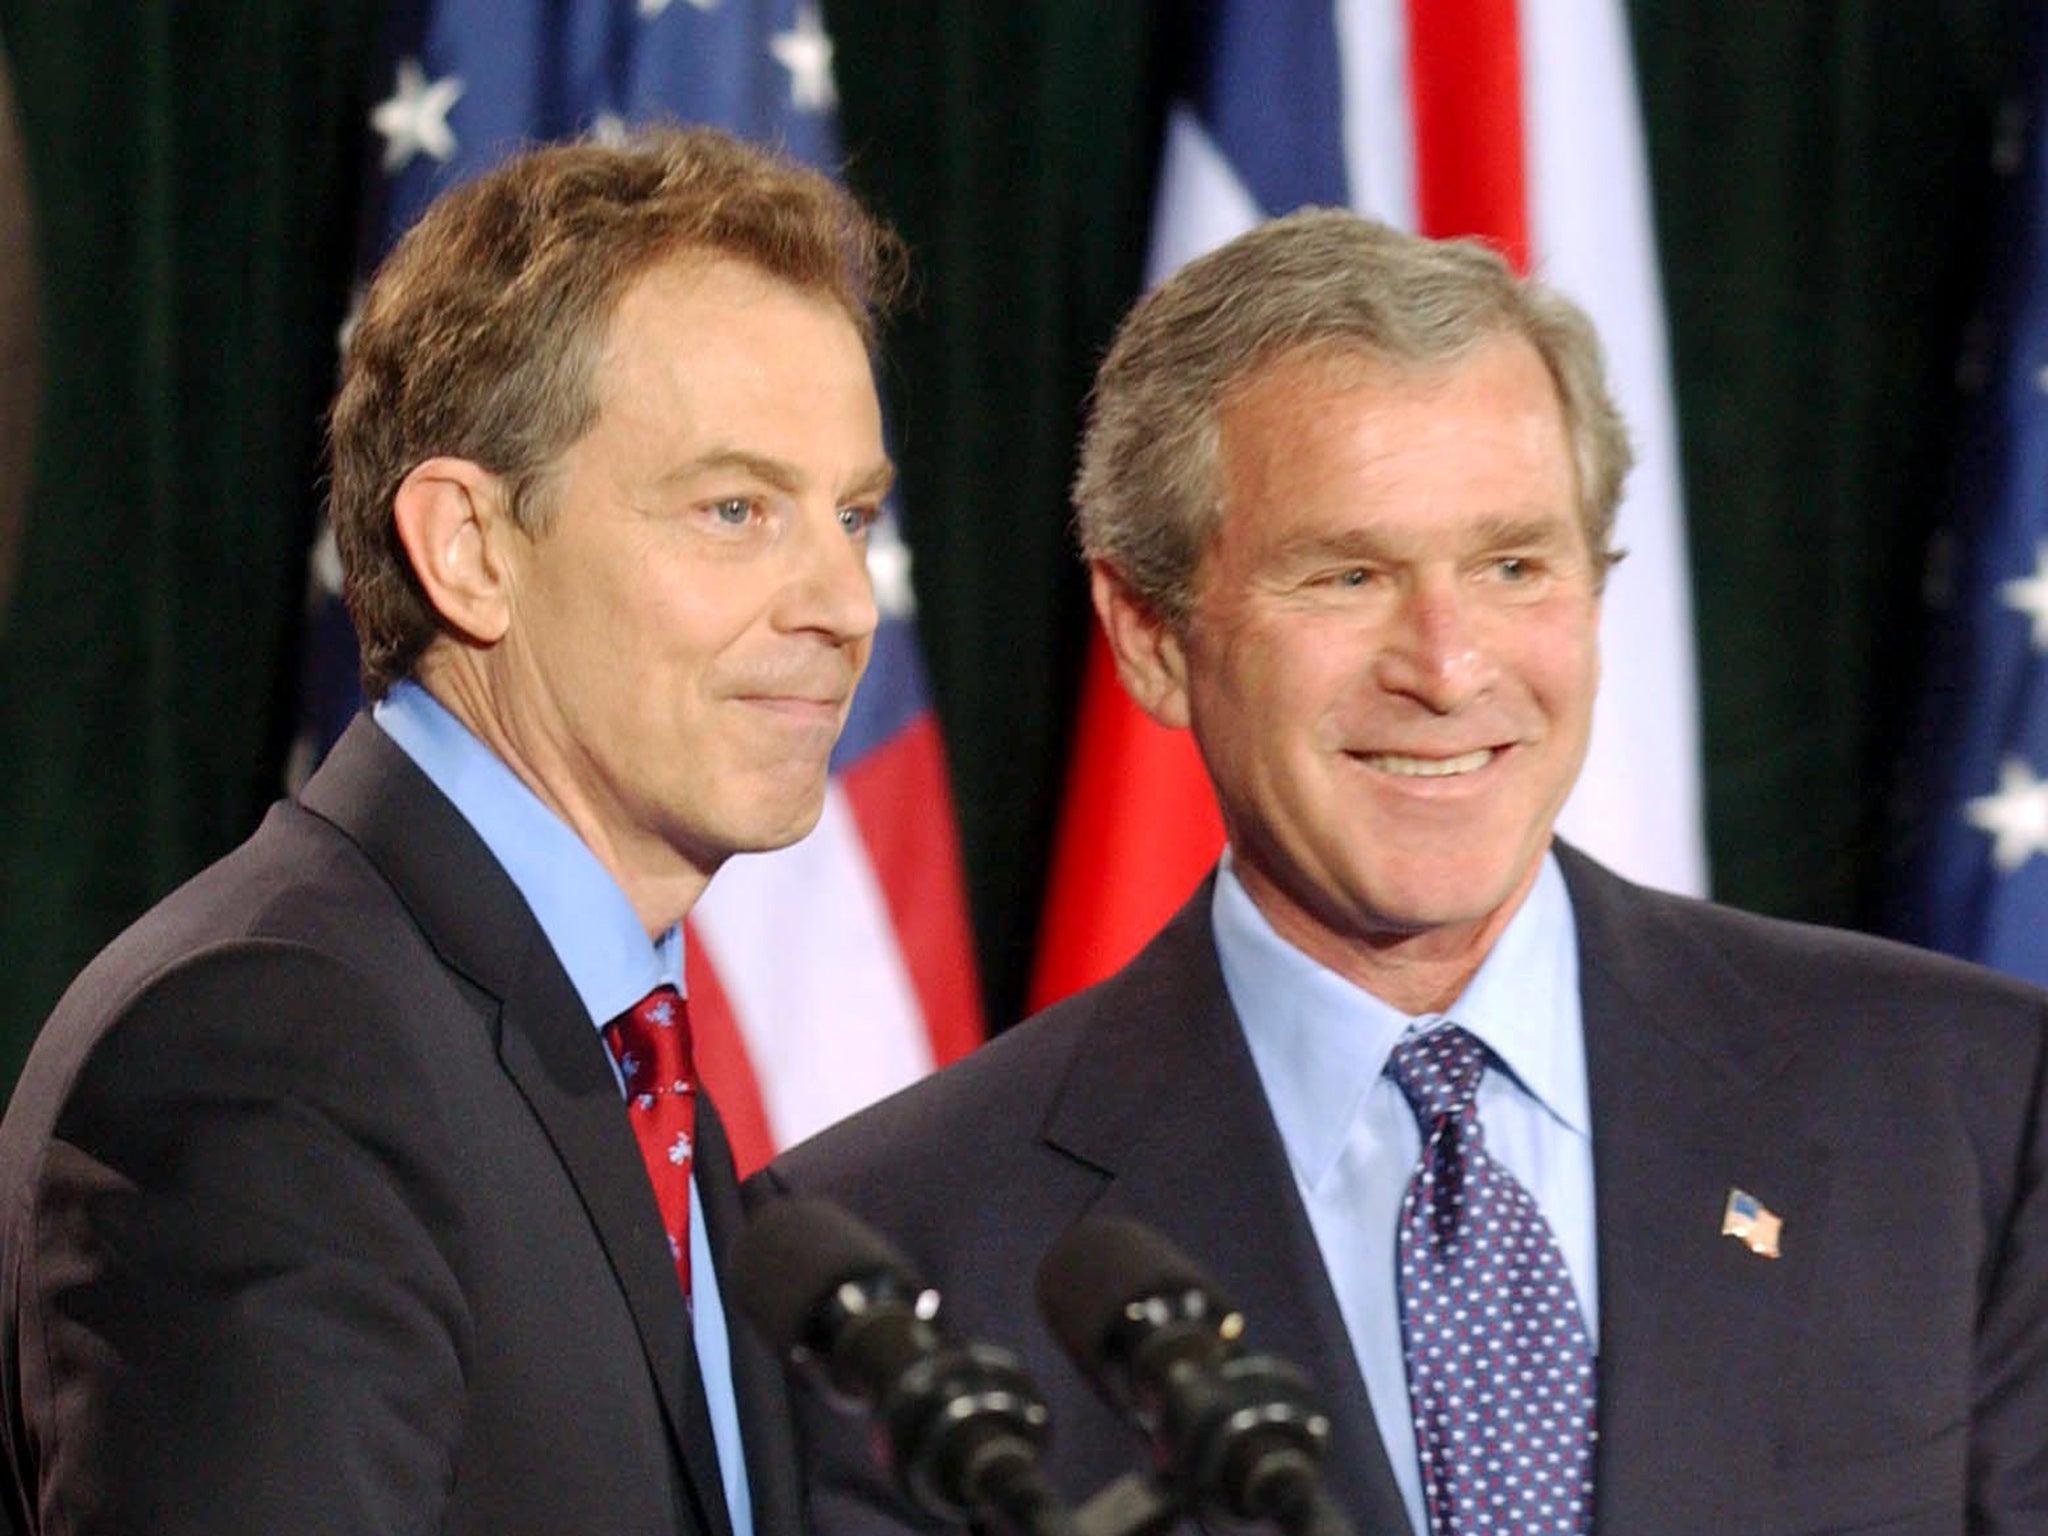 George Bush and Tony Blair during a press conference in Thurmont, Maryland in 2003